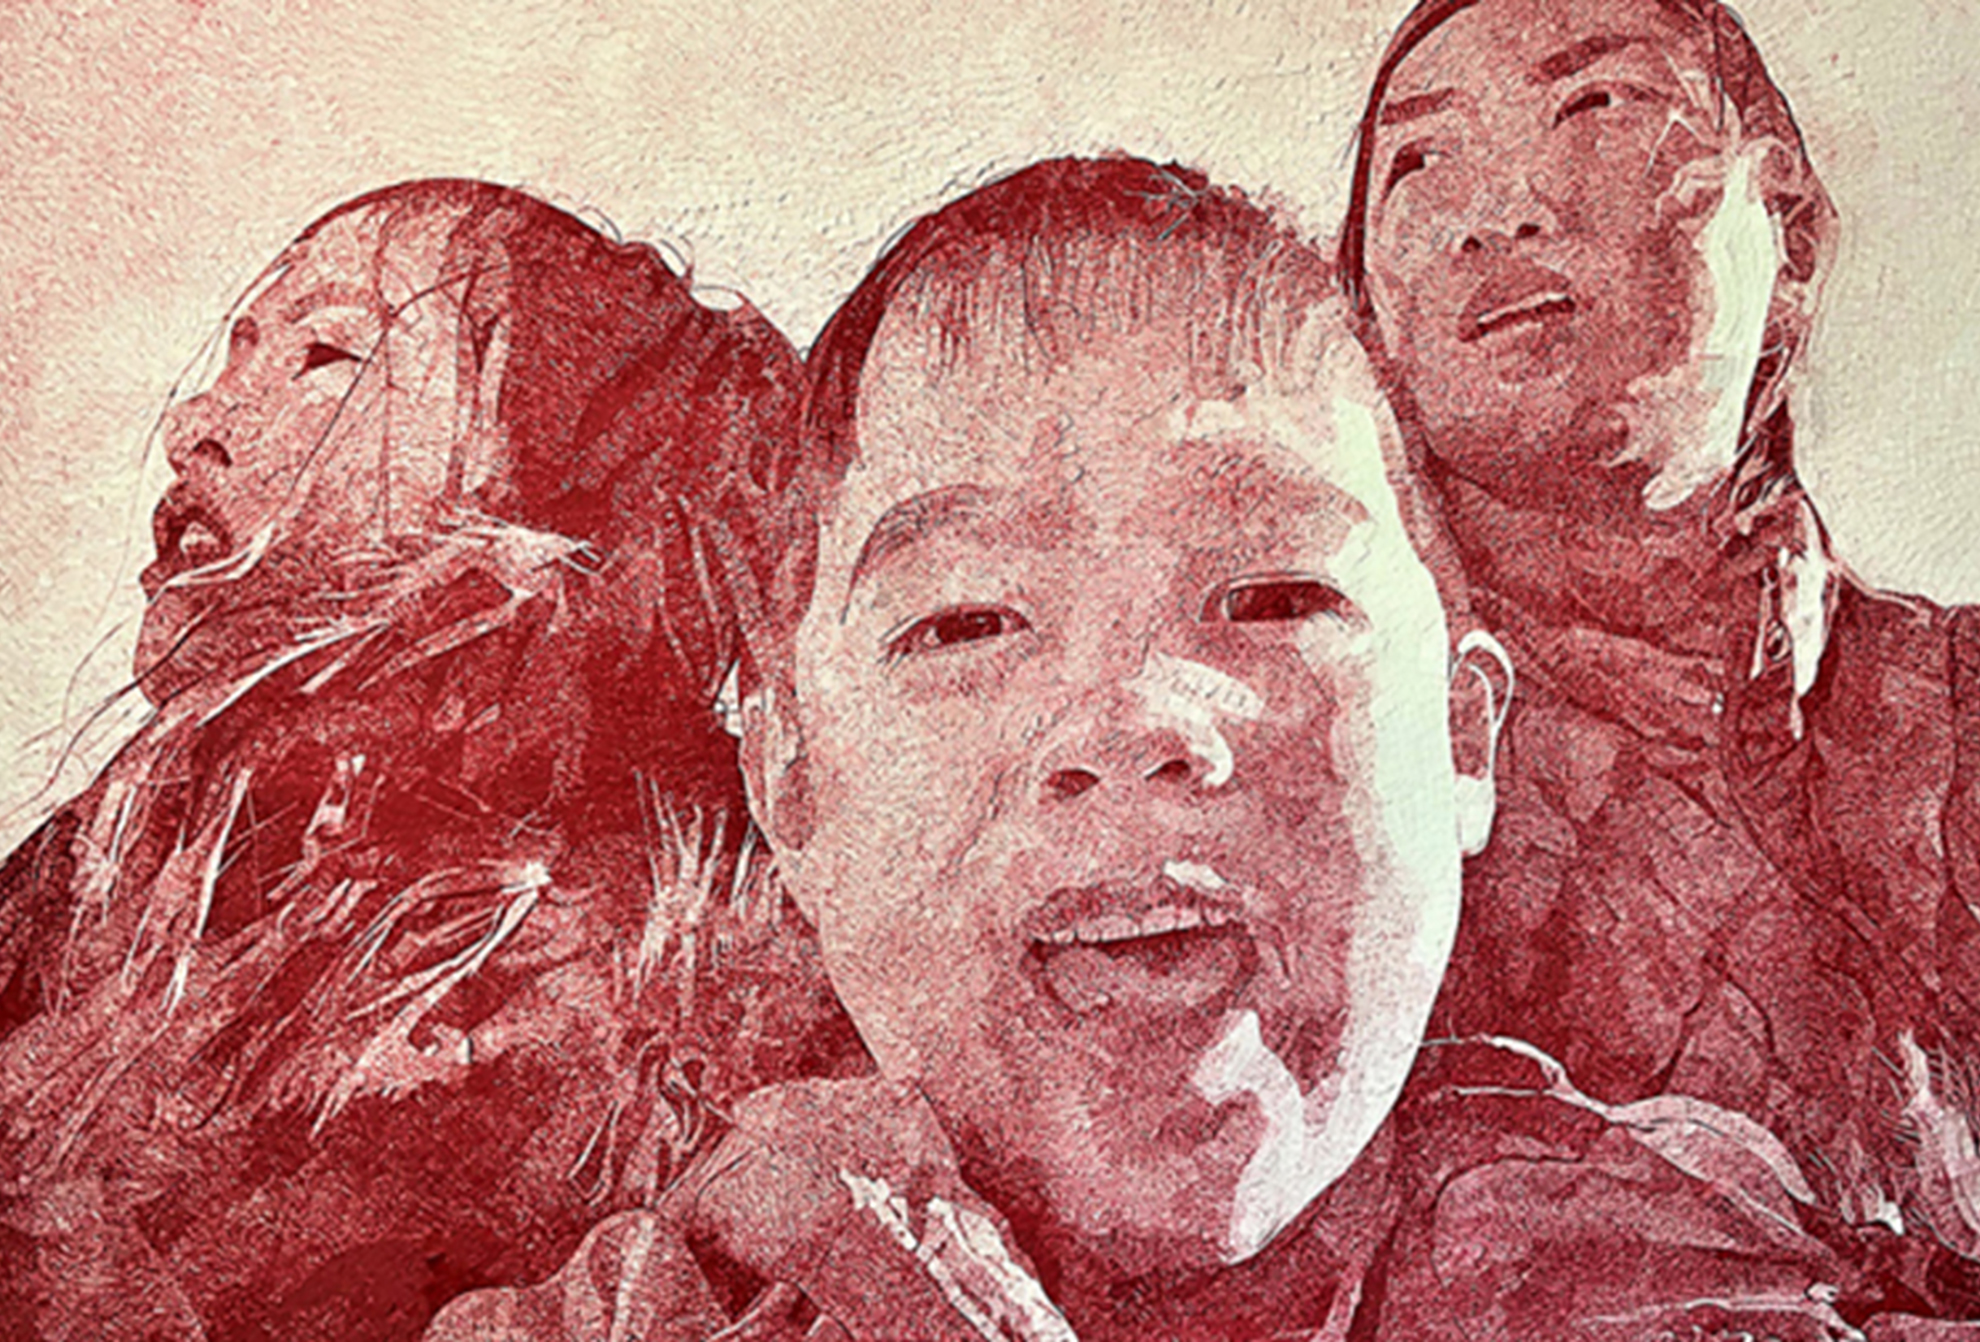 Caren King Choi (b. 1984). “Mt. Rushmore (Nieces & Nephew),” 2020. China marker, graphite, stickers on paper. 36 x 26 in.